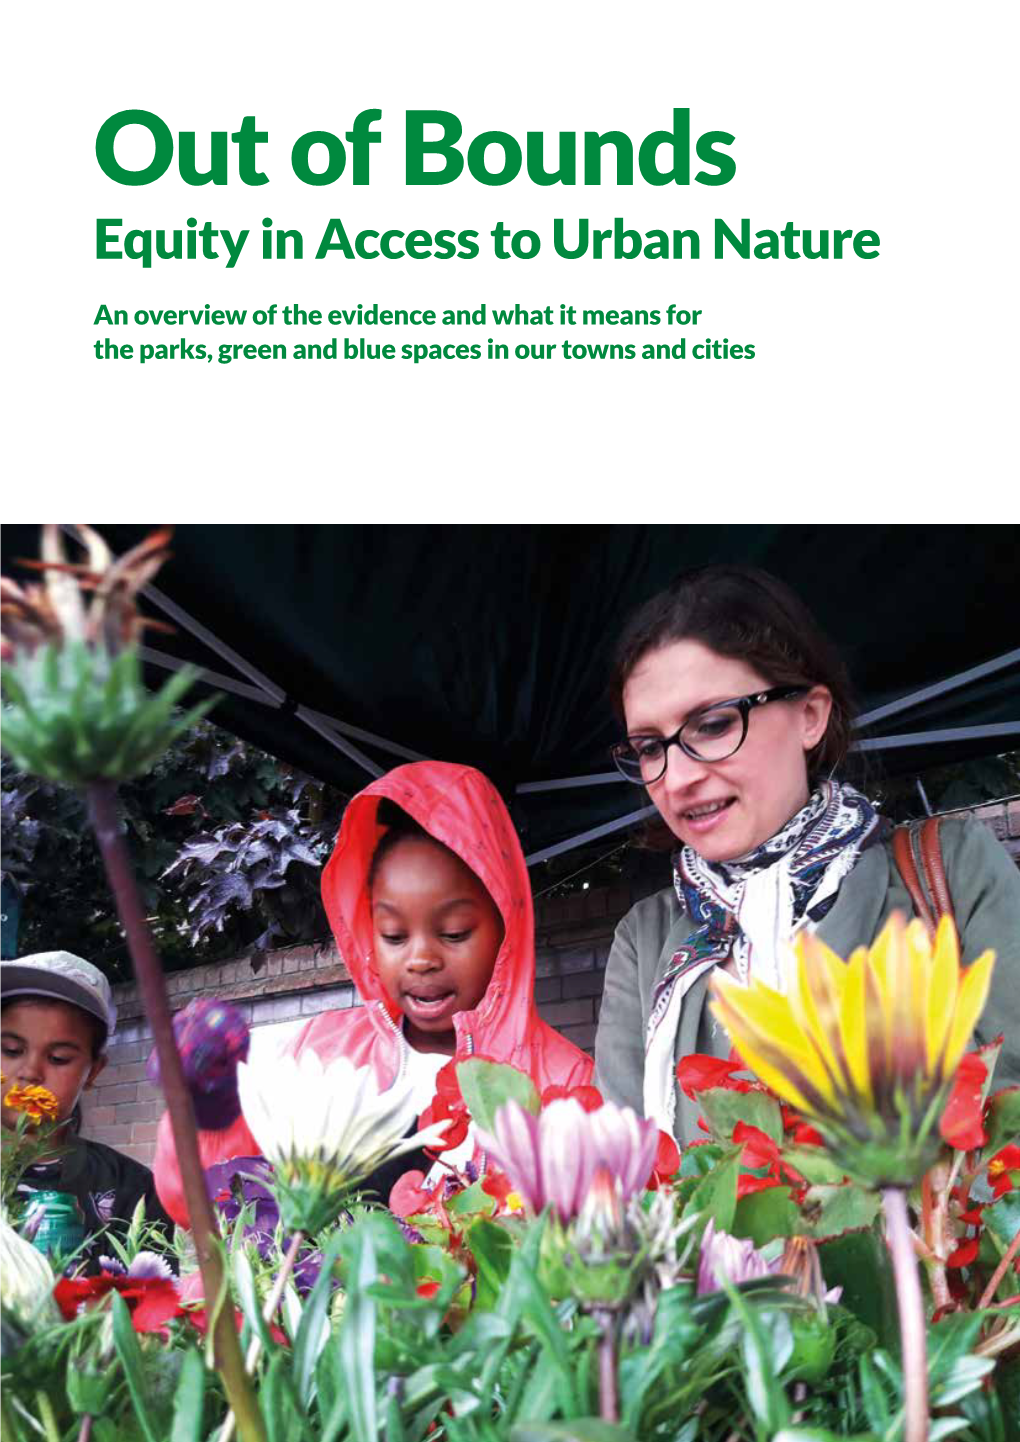 Out of Bounds: Equity in Access to Urban Nature